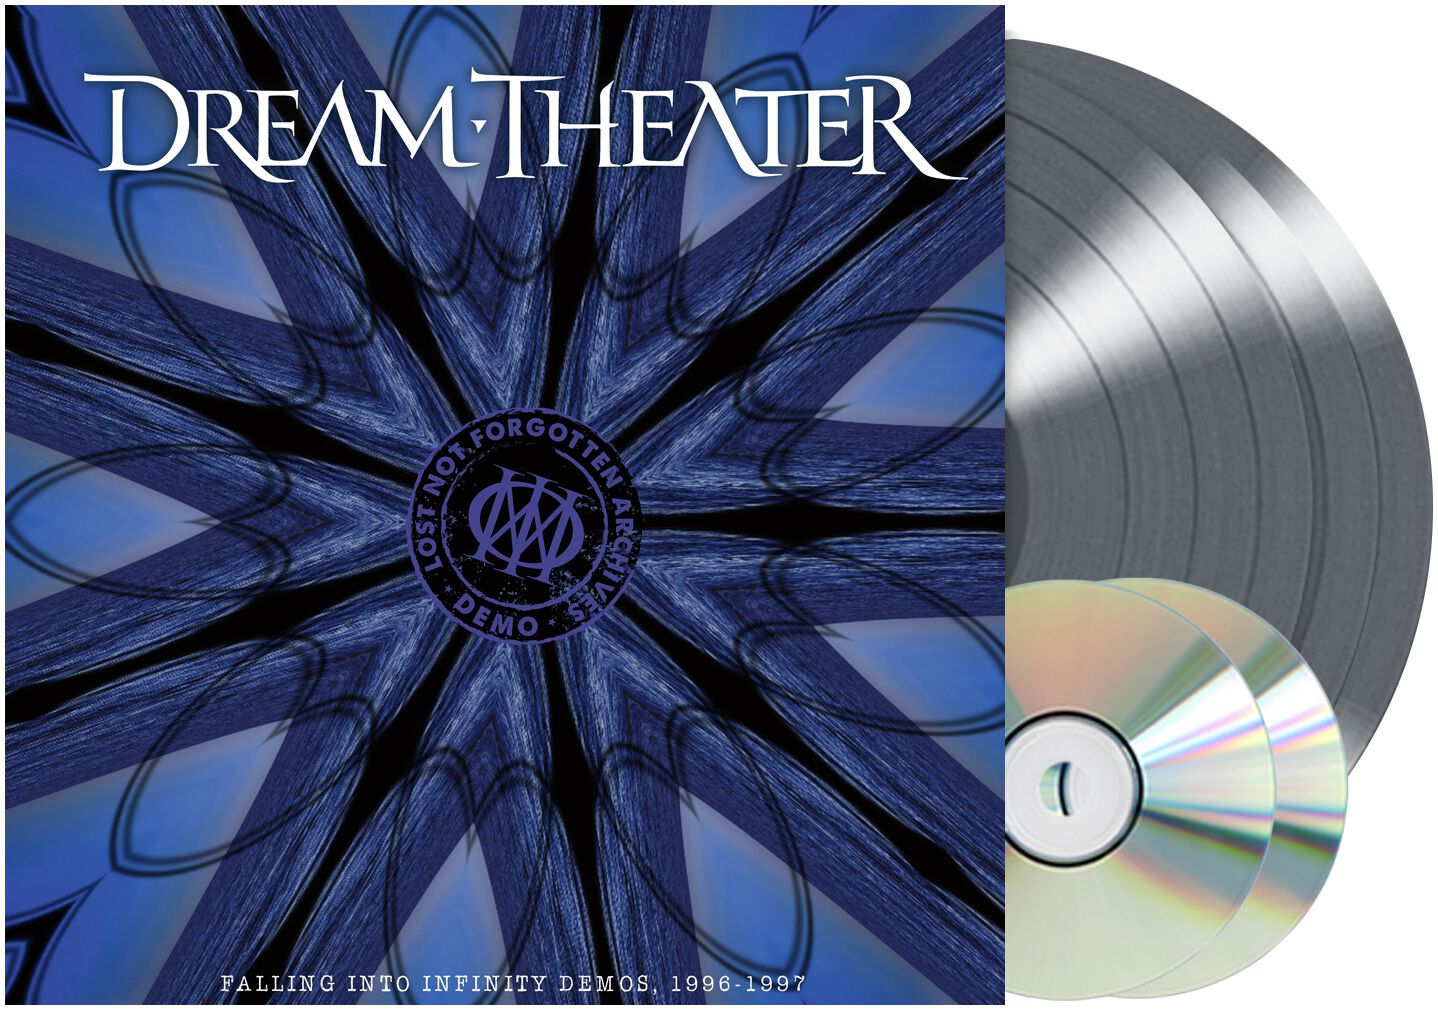 Dream Theater Lost not forgotten archives: Falling into infinity demos- 1996-1997 LP coloured